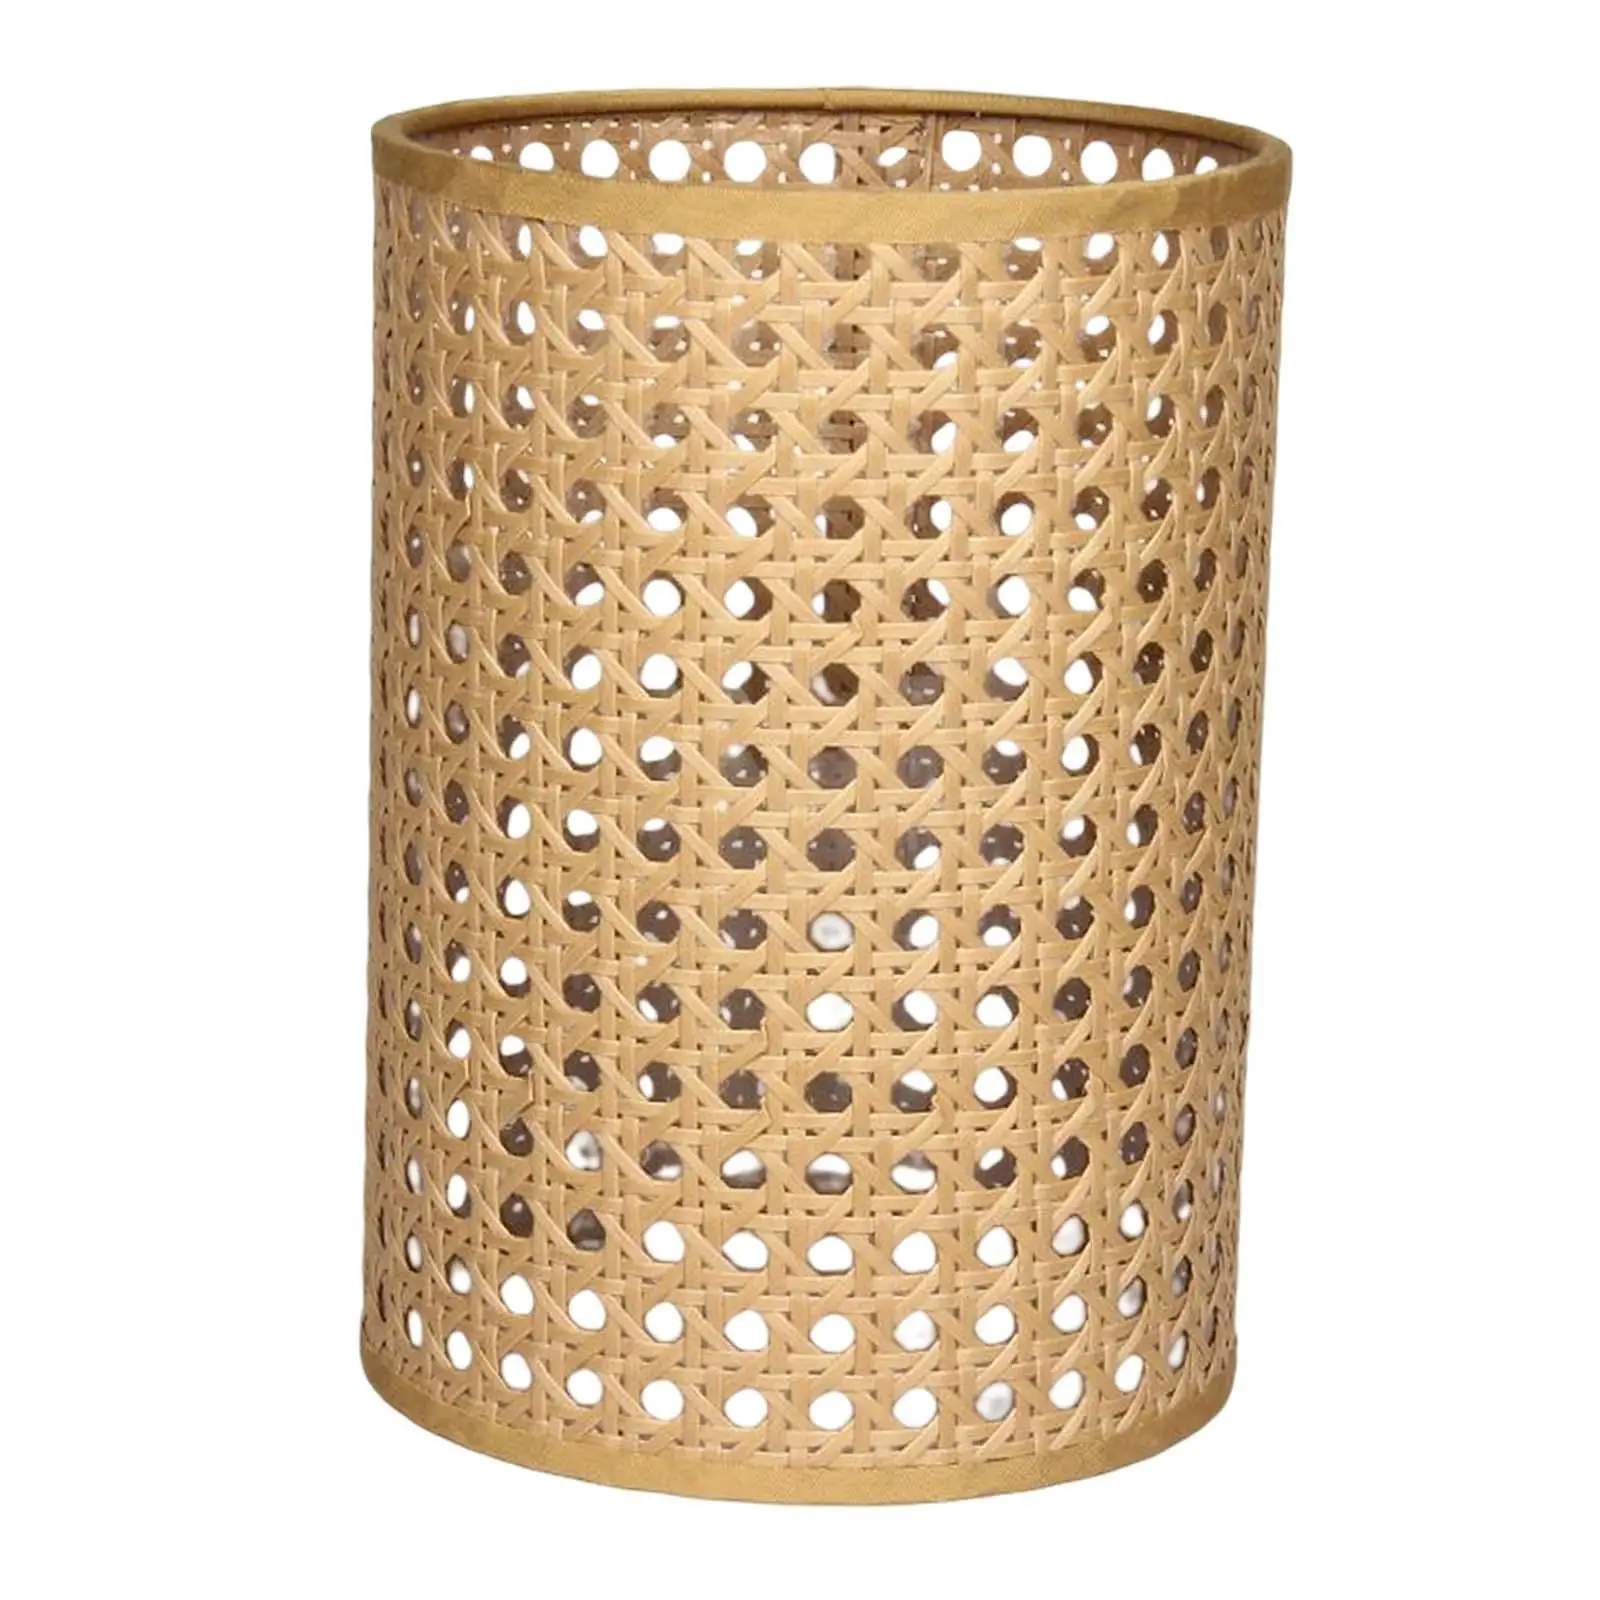 Classic Rattan Lamp Shade Ceiling Light Cover Chandelier Hanging Lantern Lampshade for Living Room Dorm Home Bedroom Decoration